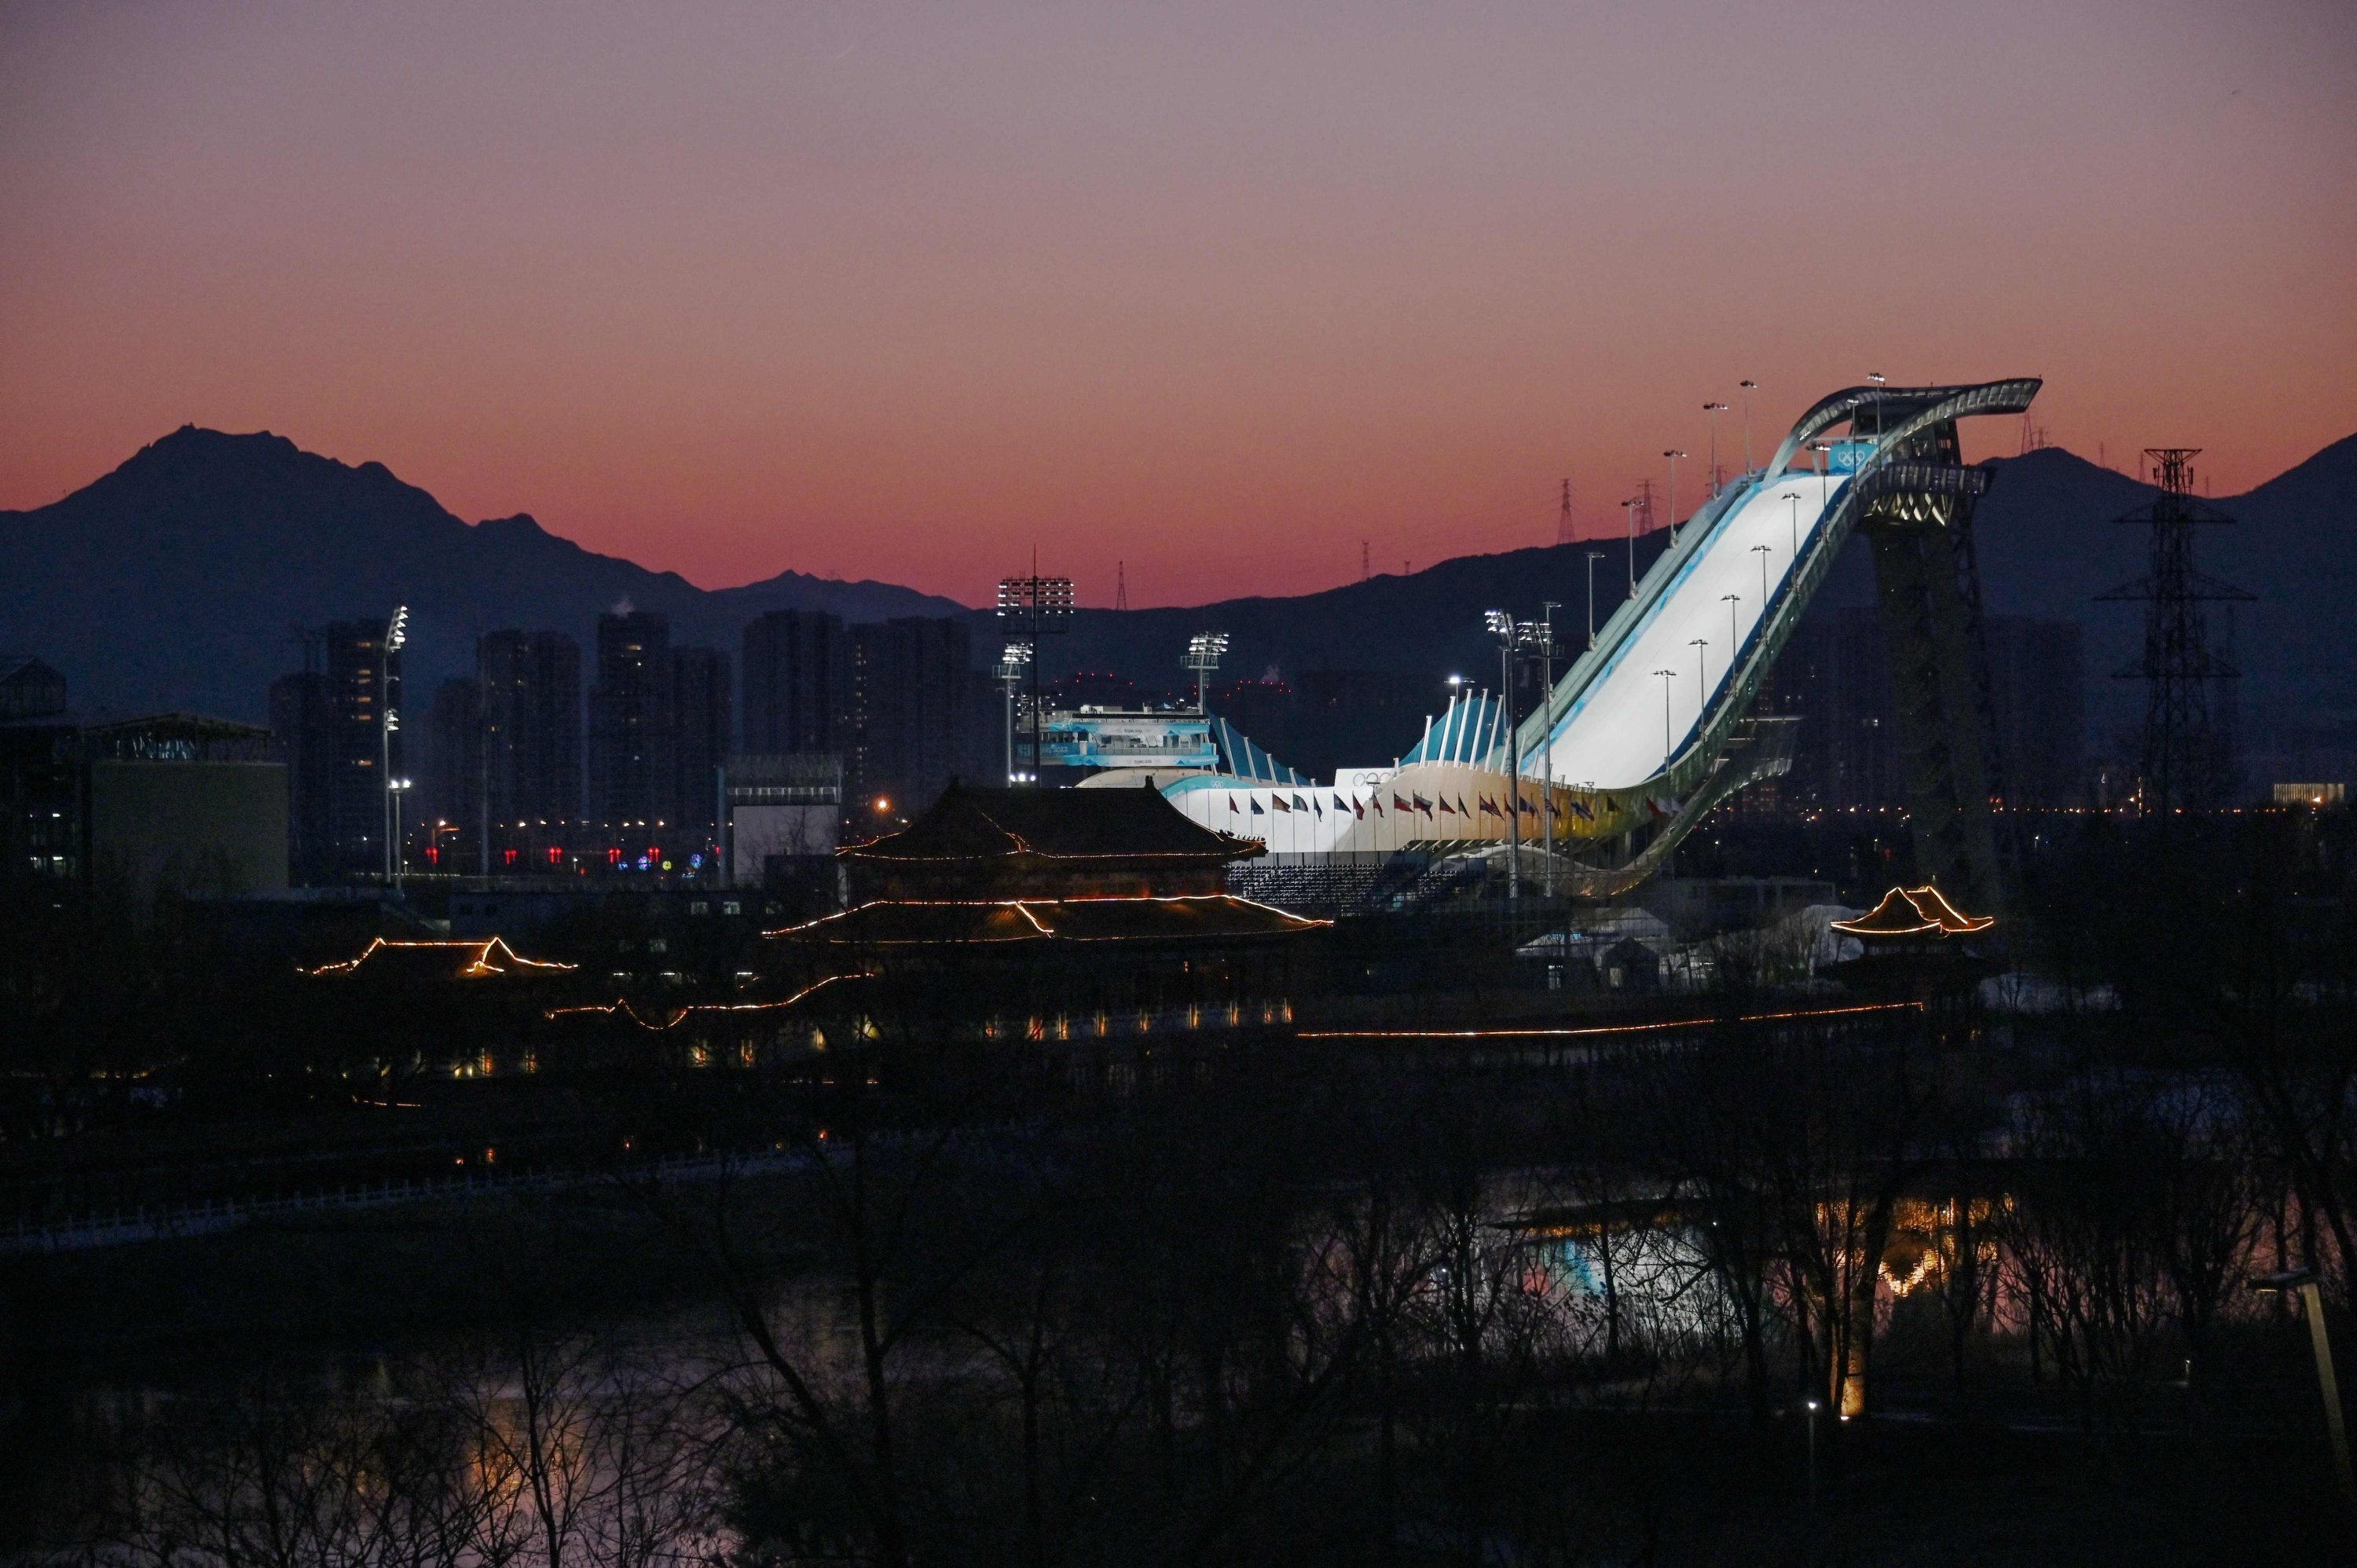 The Shougang Big Air venue, which will host the big air freestyle skiing and snowboarding competitions at the Beijing 2022 Winter Olympics, is seen during sunset at the Shougang Park, Beijing, China, Feb. 2, 2022. (AFP Photo)